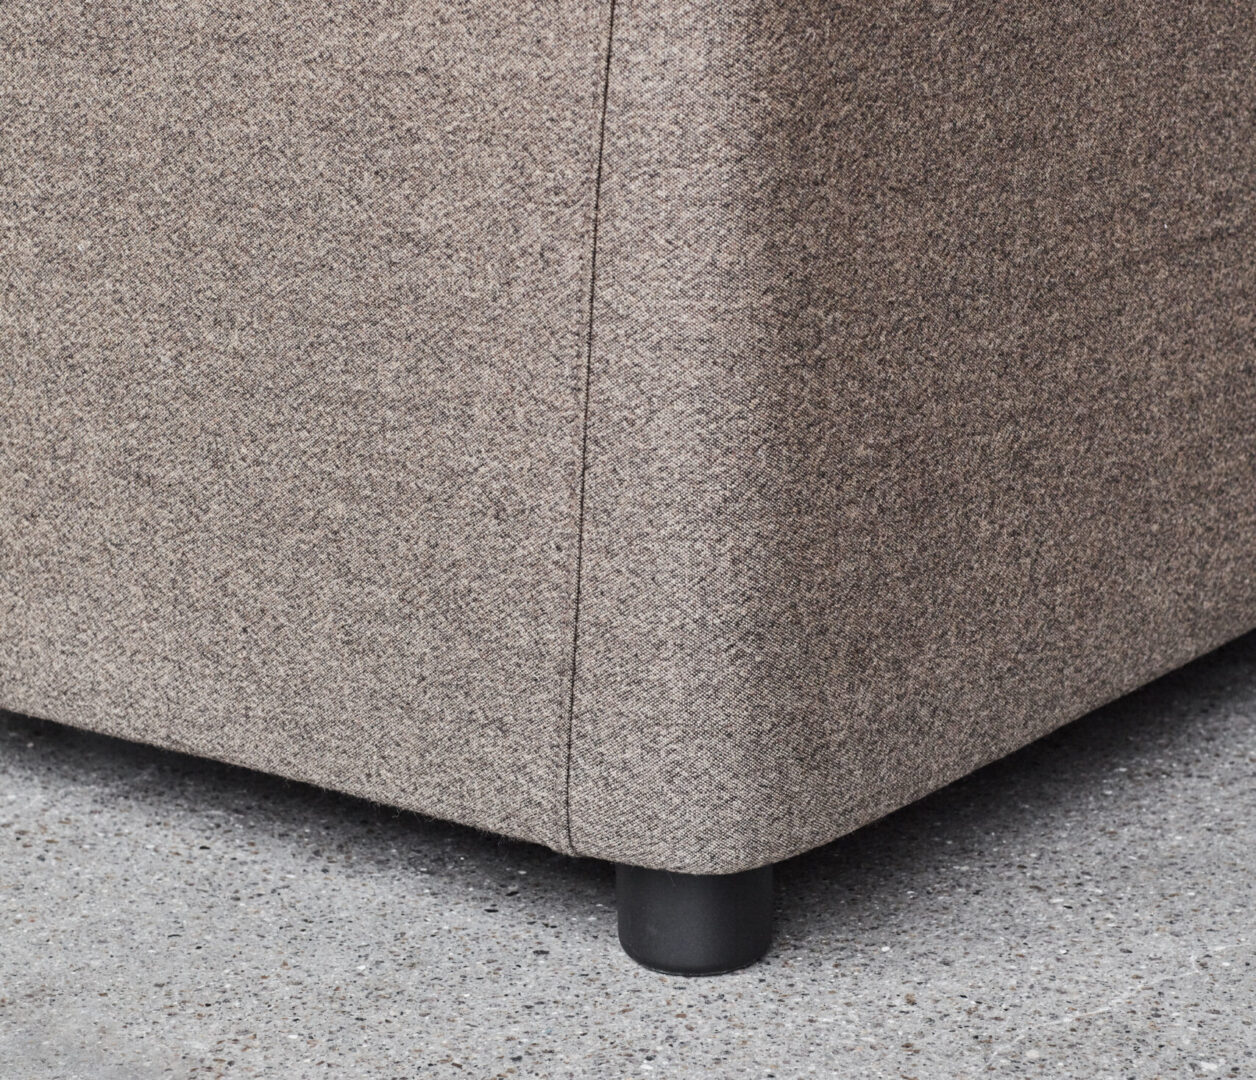 OCEE&FOUR – Soft Seating – FourLikes Sofa – Details Image 7